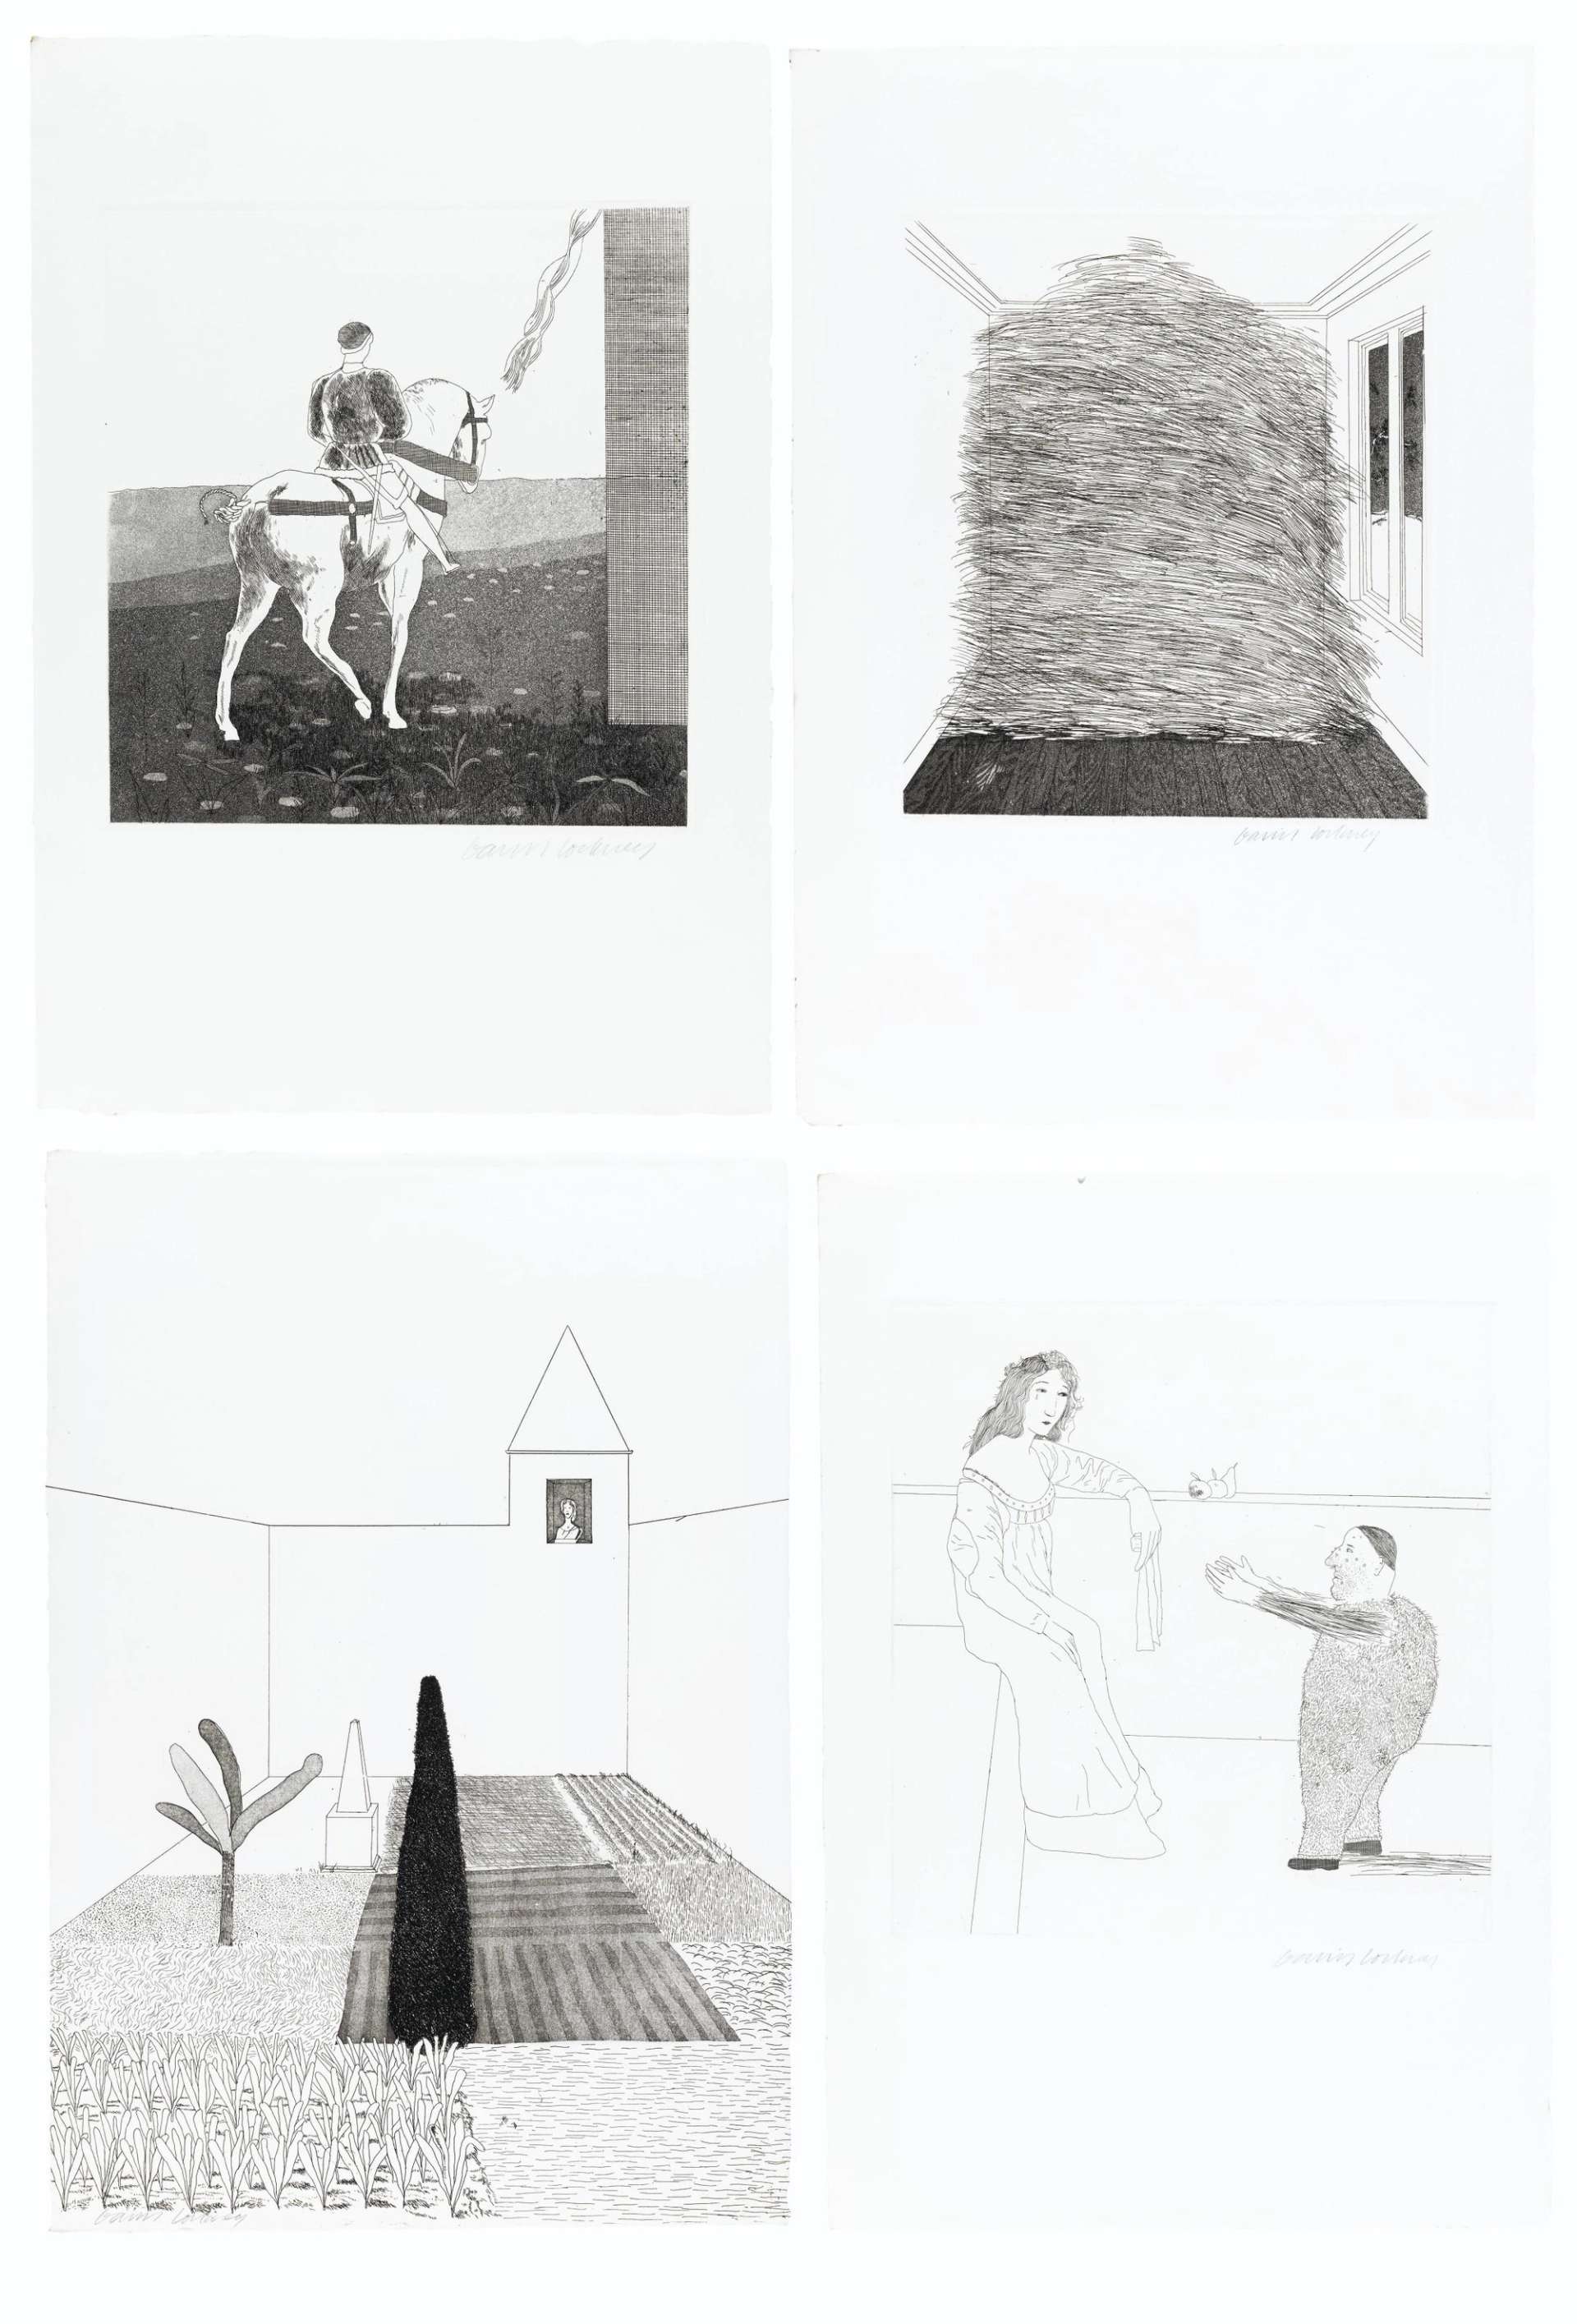 Four prints by David Hockney, showing a knight on a horse, a bale of hay, a house with a tower, and a princess alongside Rumpelstiltskin.